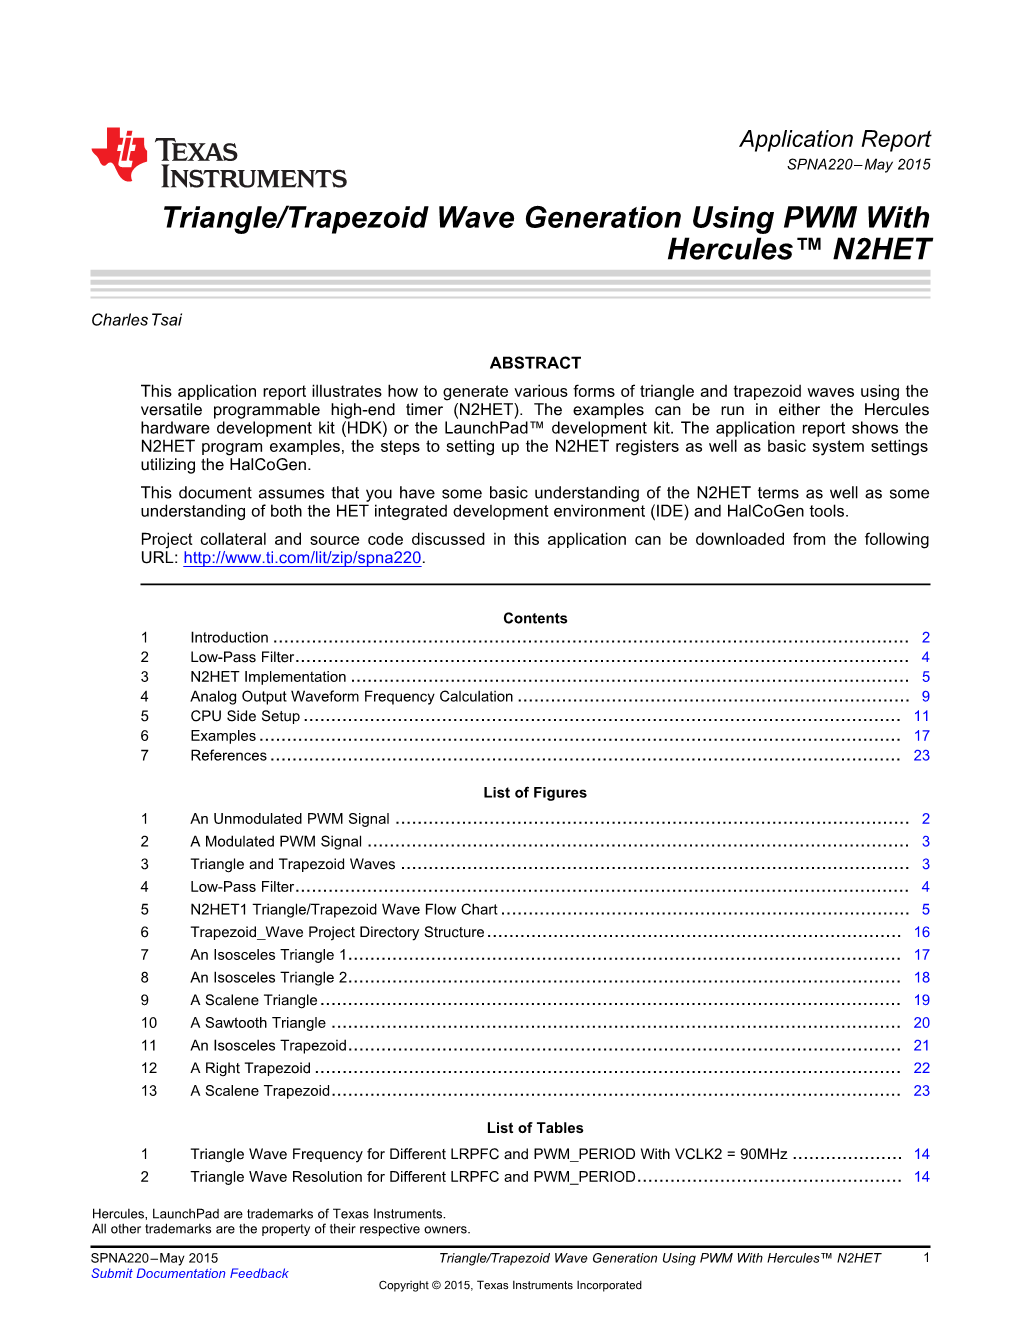 Triangle/Trapezoid Wave Generation Using PWM with Hercules™ N2HET